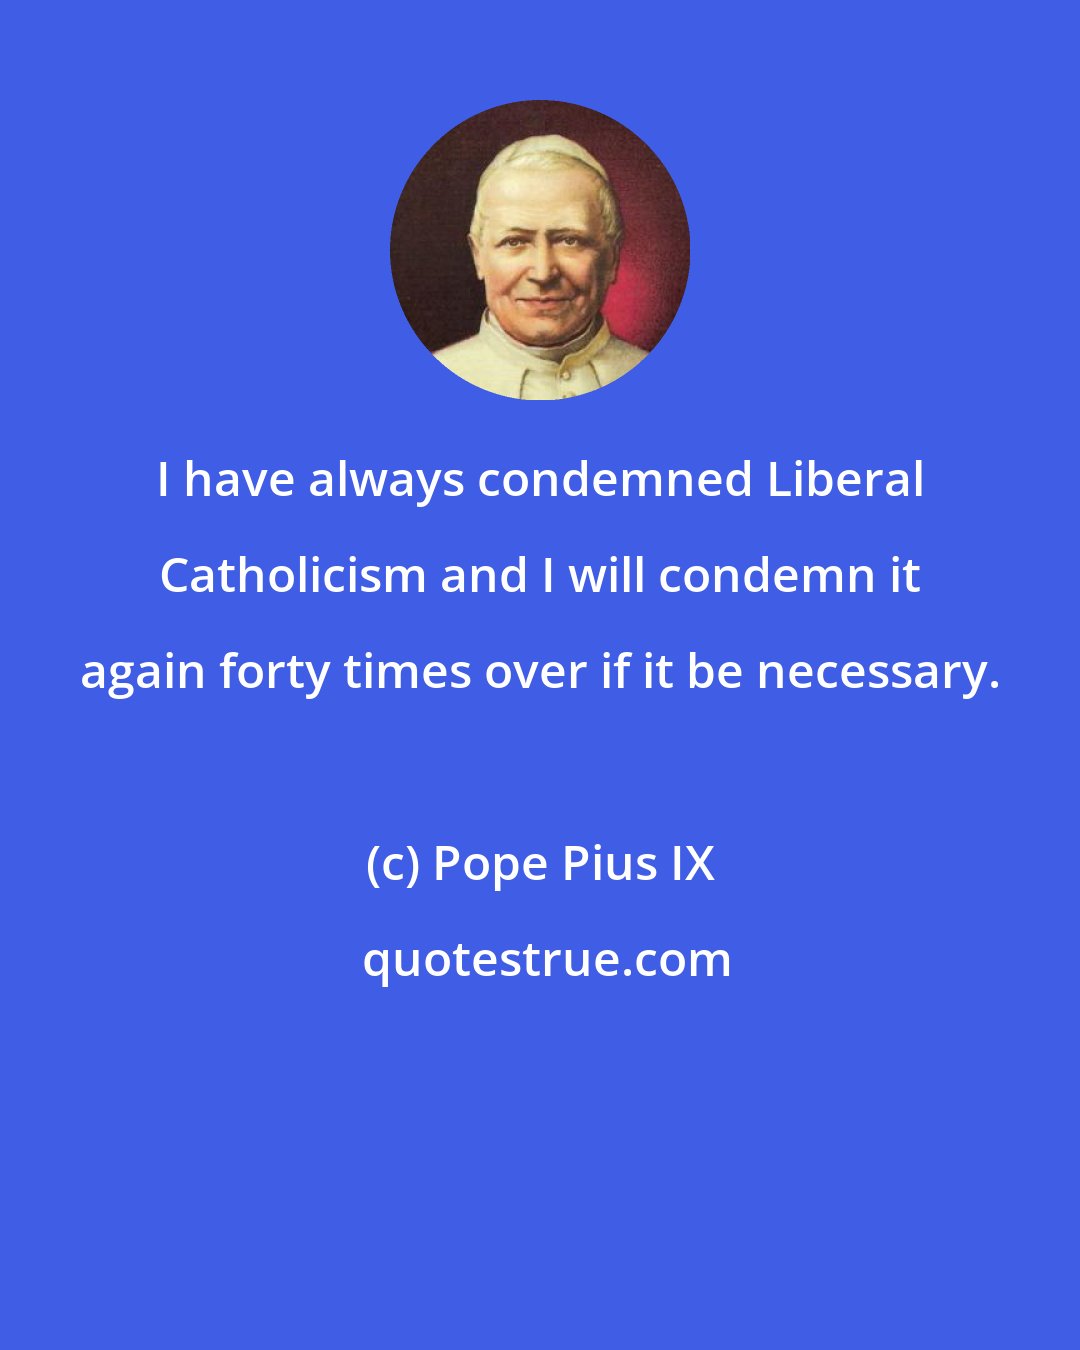 Pope Pius IX: I have always condemned Liberal Catholicism and I will condemn it again forty times over if it be necessary.